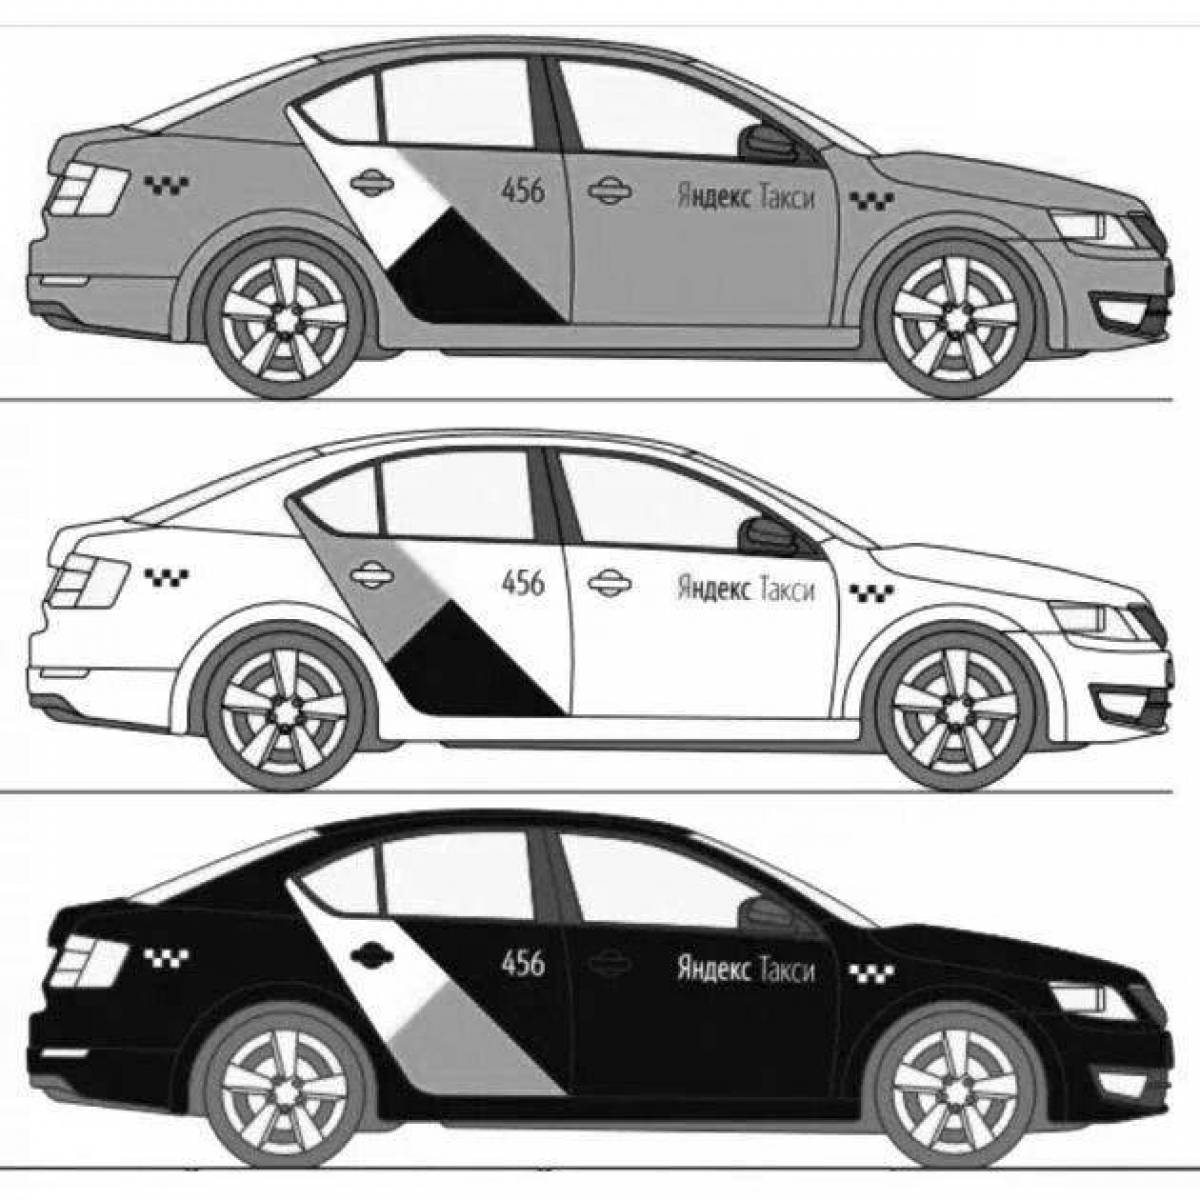 Yandex taxi glowing coloring page